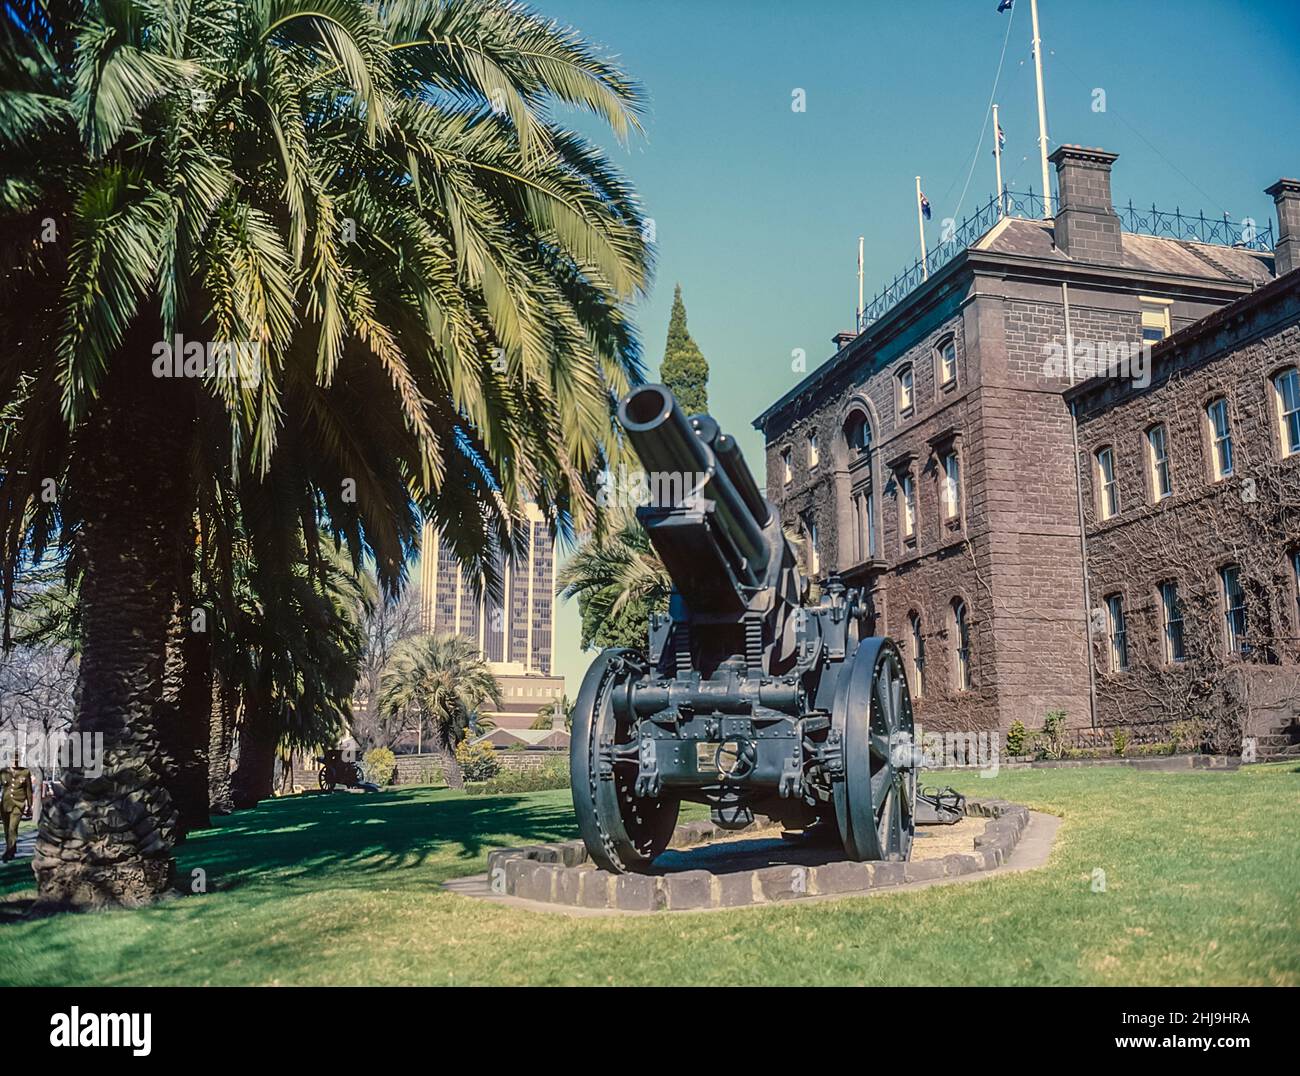 The image is of the impressive Fortress like Melbourne Victoria Barracks Museum close to the Yarra River. With a 5.9 inch Turkish Howitzer captured during the Gaza-Beersheba Campaign near Jerusalem in 1917. The Barracks opened in 1872 Stock Photo